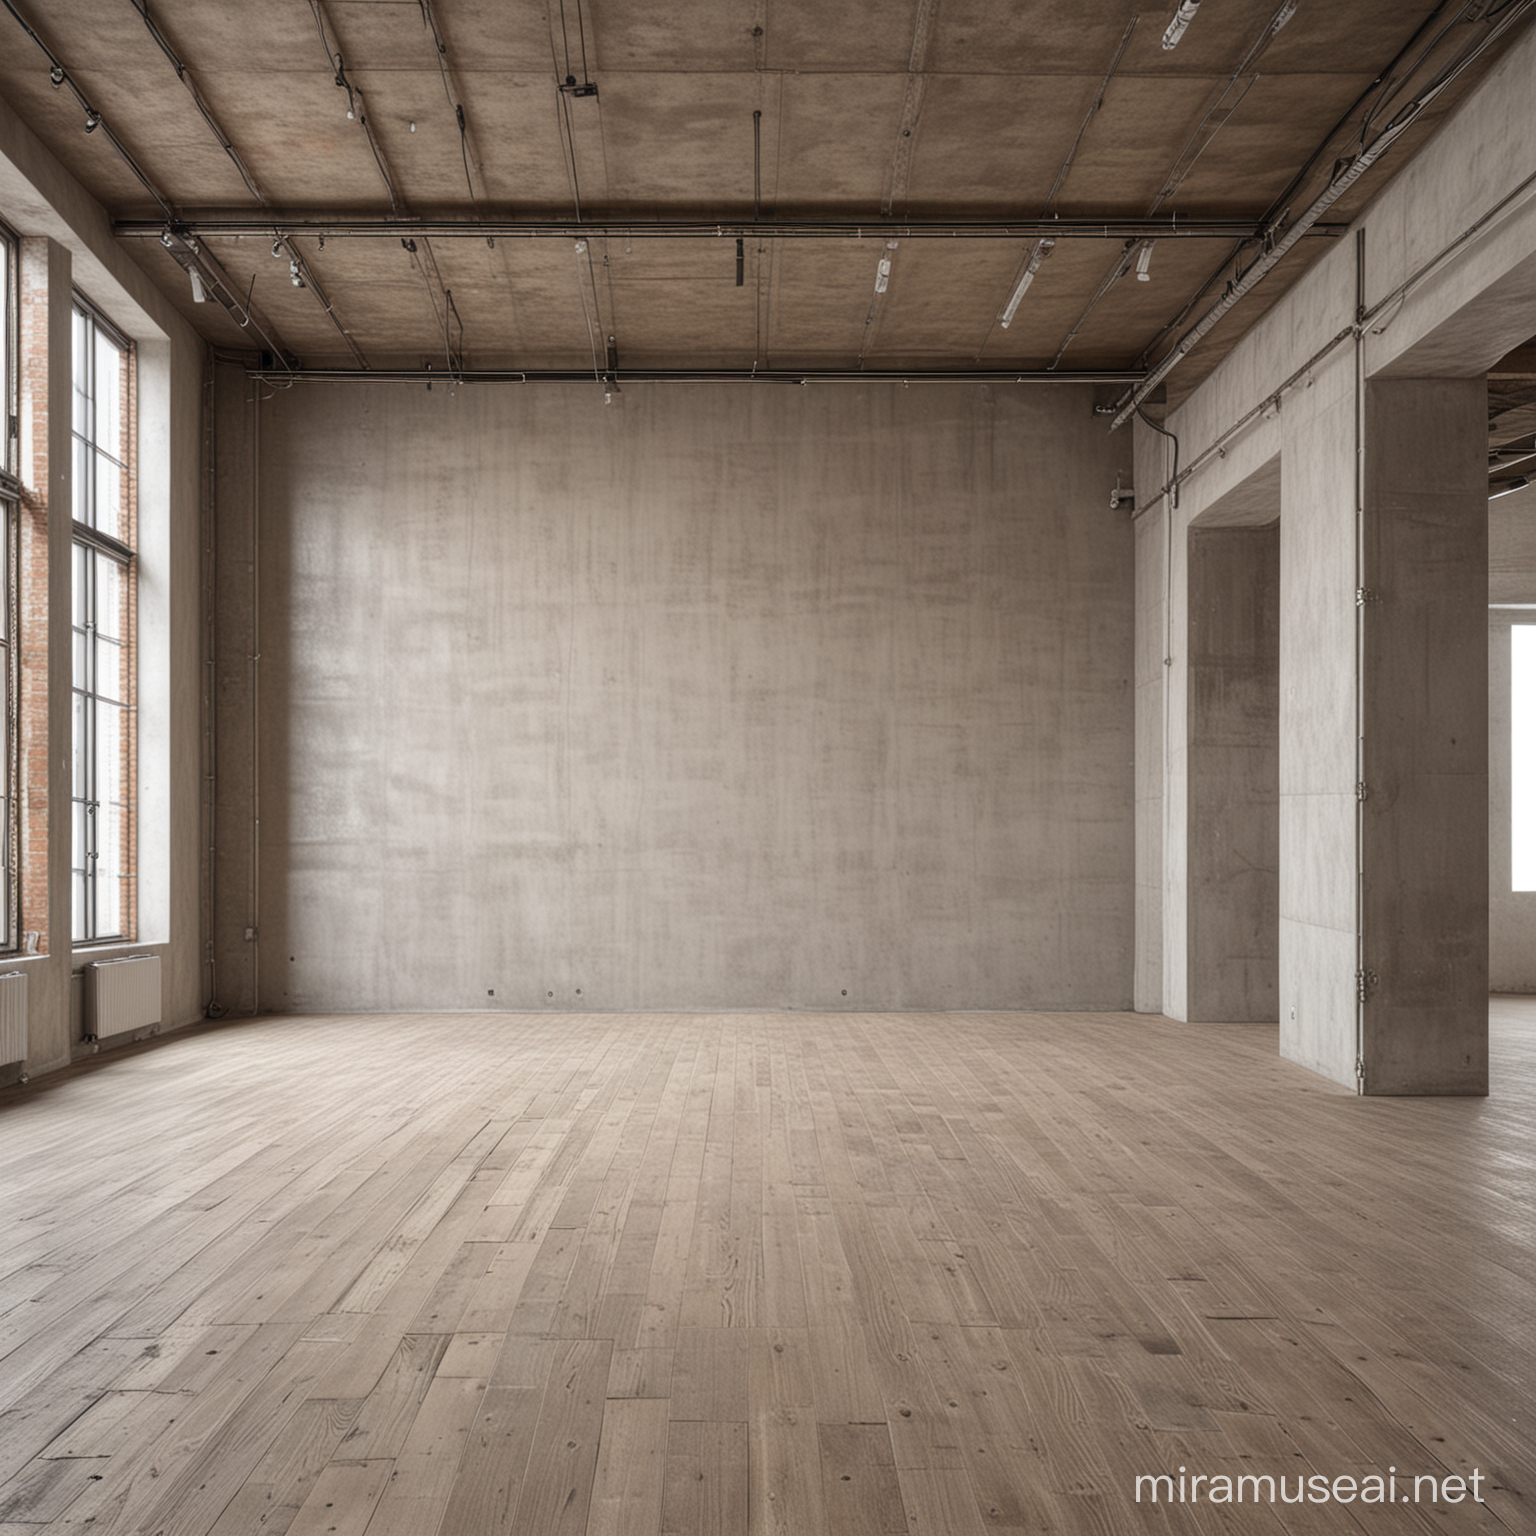 large empty wallspace in a loft style apartment
